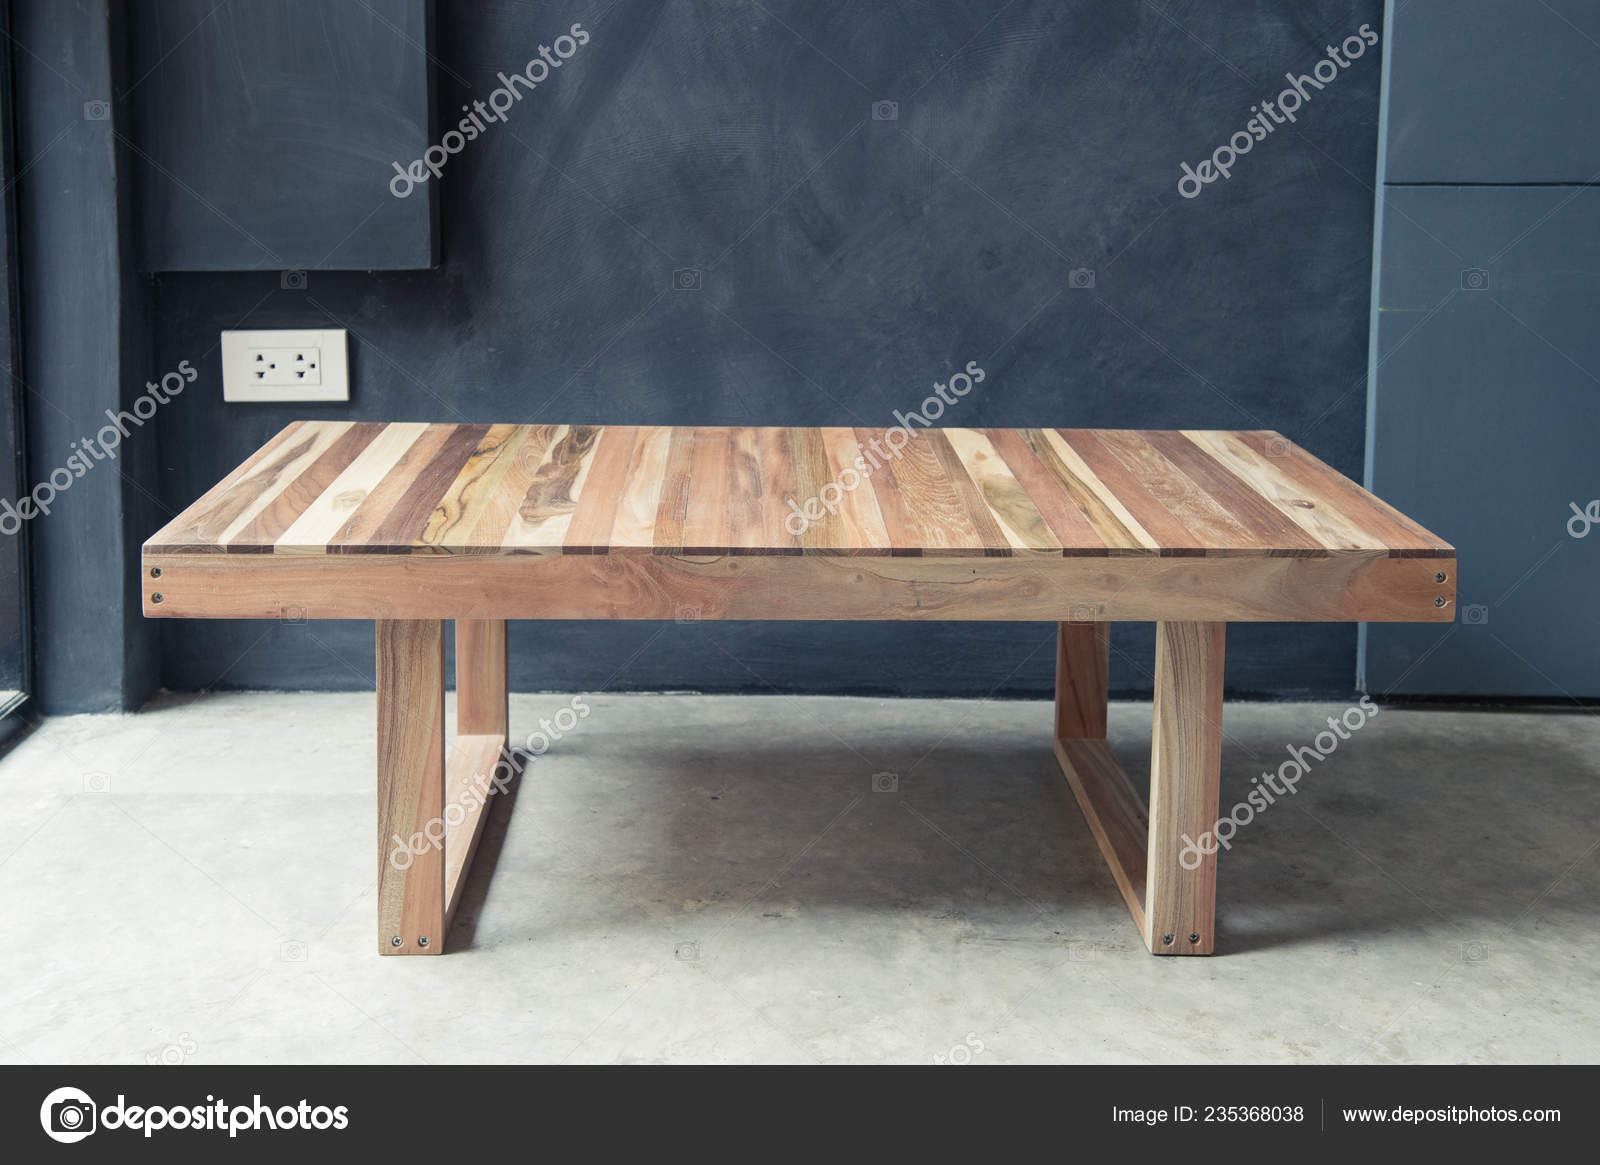 Images Coffee Table Designs Closeup Wooden Coffee Table Design